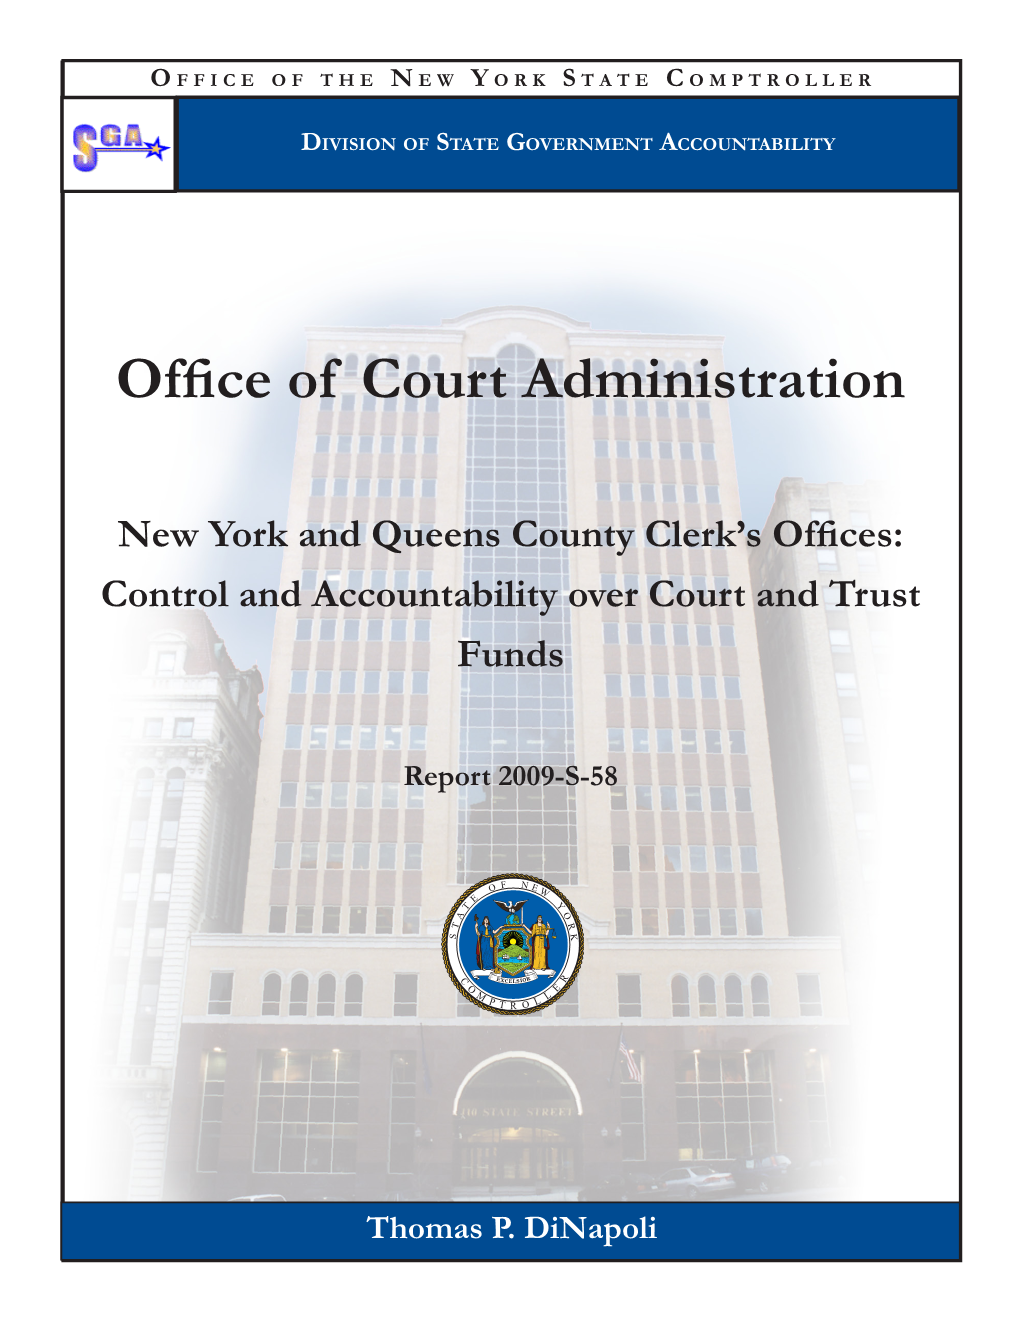 New York and Queens County Clerk's Offices